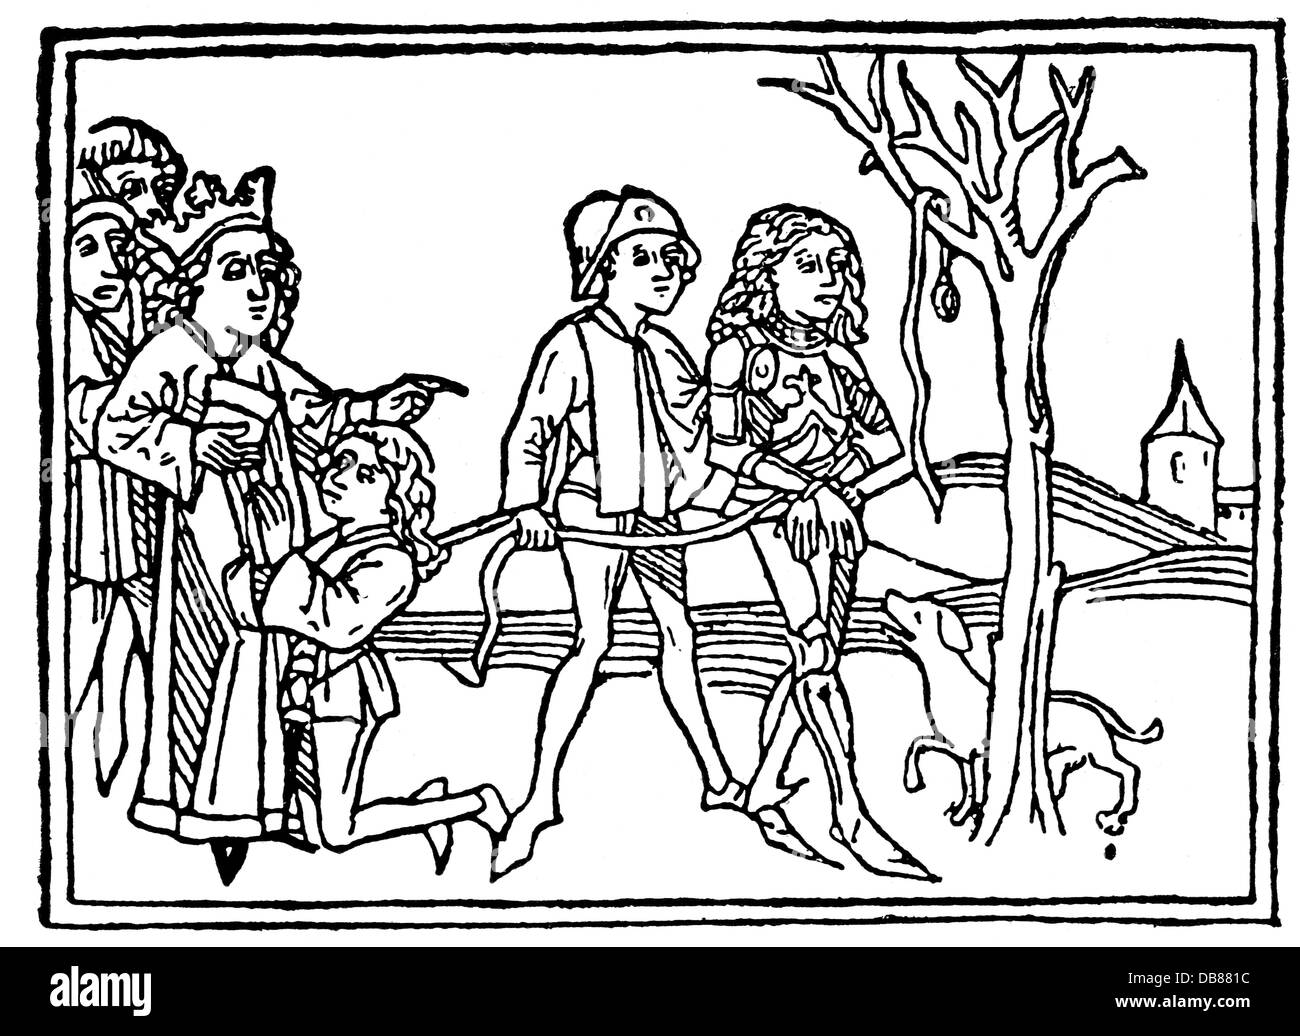 justice, penitentiary system, hanging, convict is led to the gallows, woodcut, 15th century, 15th century, Middle Ages, medieval, mediaeval, graphic, graphics, jurisdiction, penalty, penalties, punishment, punishments, execution, executions, king, kings, judges, referee, associate judge, going, go, enchained, begging, beg, petition, petitioning, hanging, hang, gallows, gibbet, gibbets, lead, leading, historic, historical, people, Additional-Rights-Clearences-Not Available Stock Photo